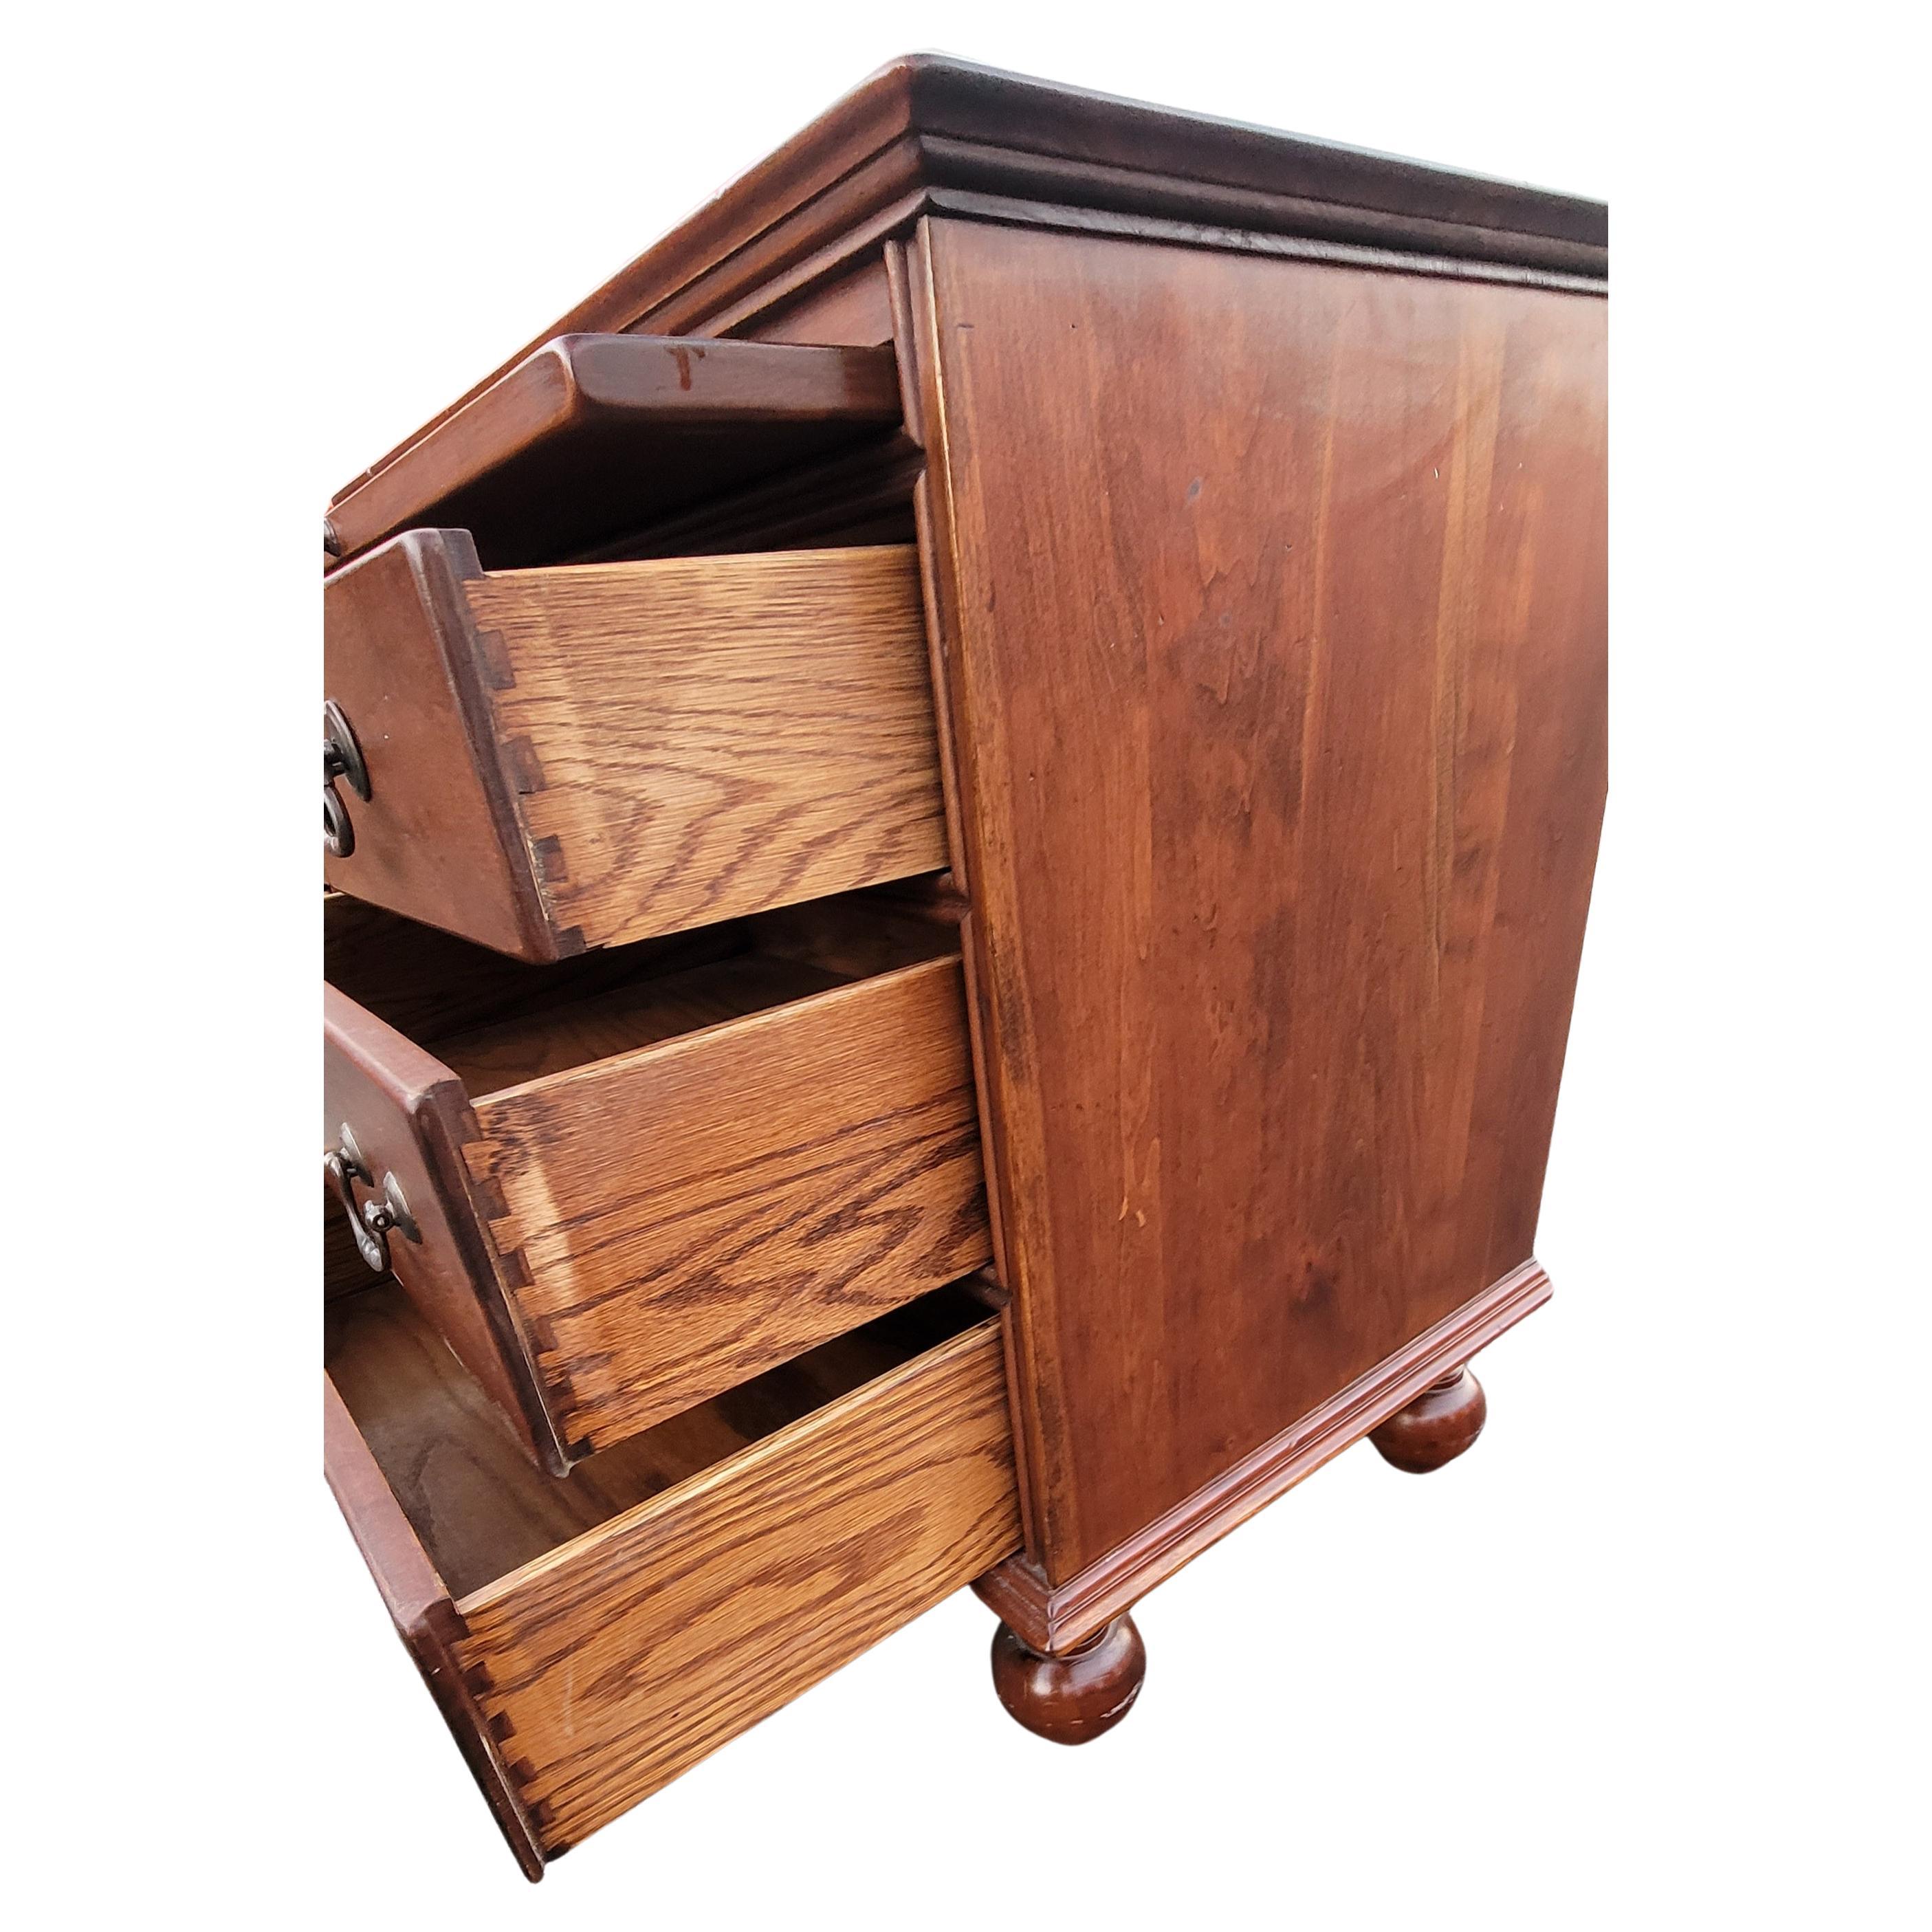 Woodwork Bob Timberlake For Lexington 4-Drawer Wild Cherry Bedside Chests W Pull Out Tray